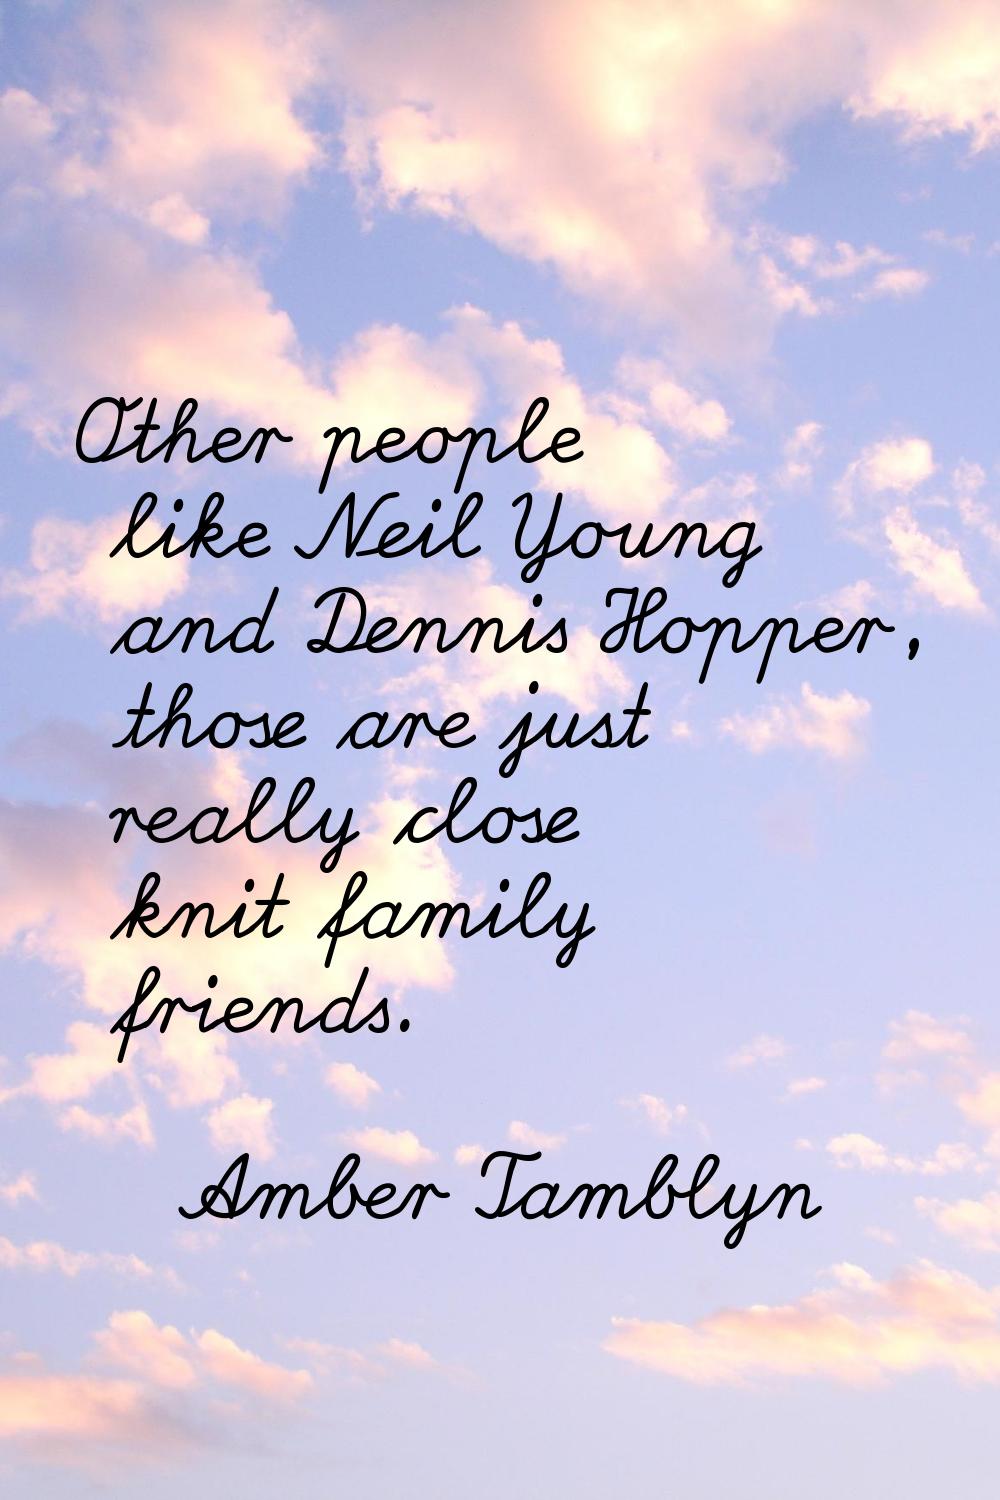 Other people like Neil Young and Dennis Hopper, those are just really close knit family friends.